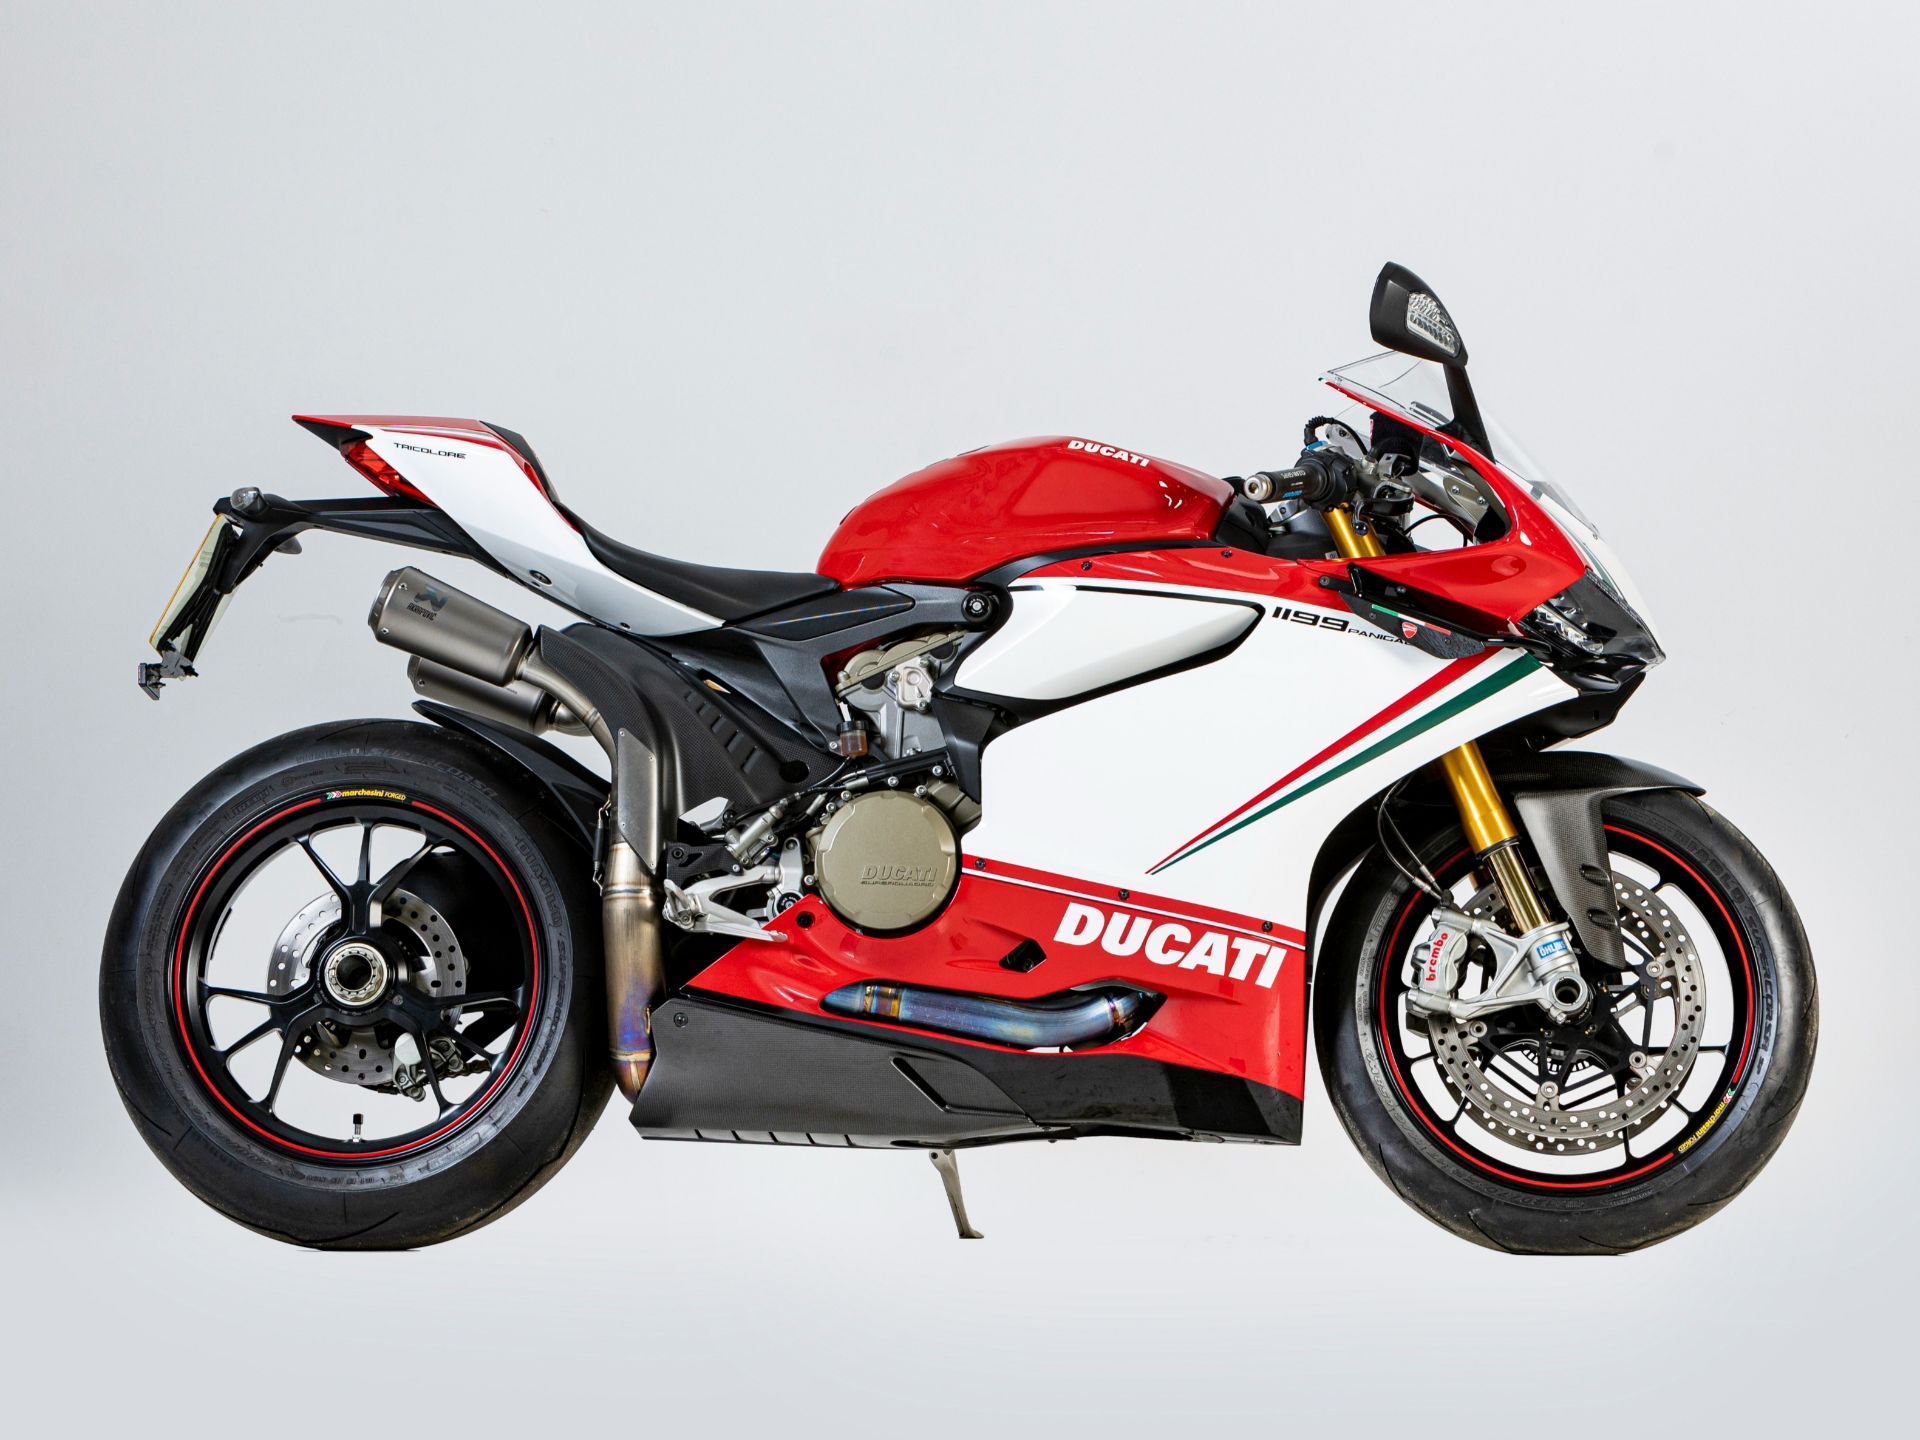 Property of a deceased's estate, 2012 Ducati 1199 Panigale S Tricolore Frame no. *ZDMH800ABCB006...